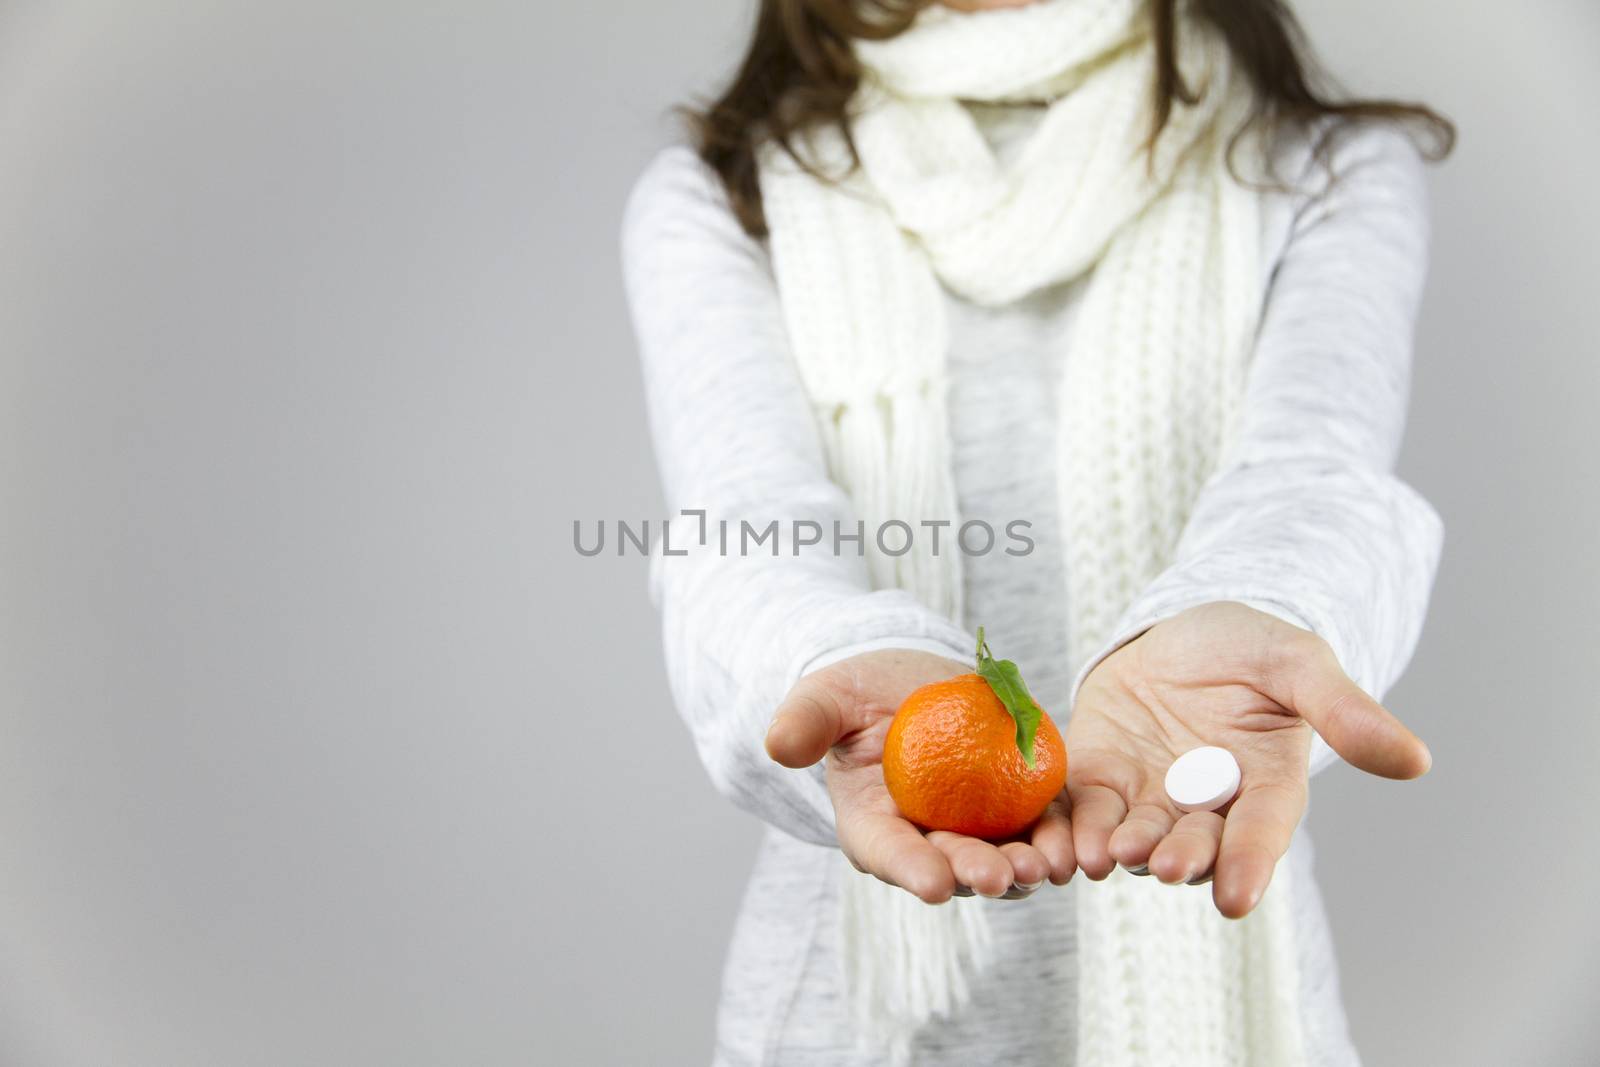 Vitamins from fruit or drugs? A sick young woman with a scarf on by robbyfontanesi